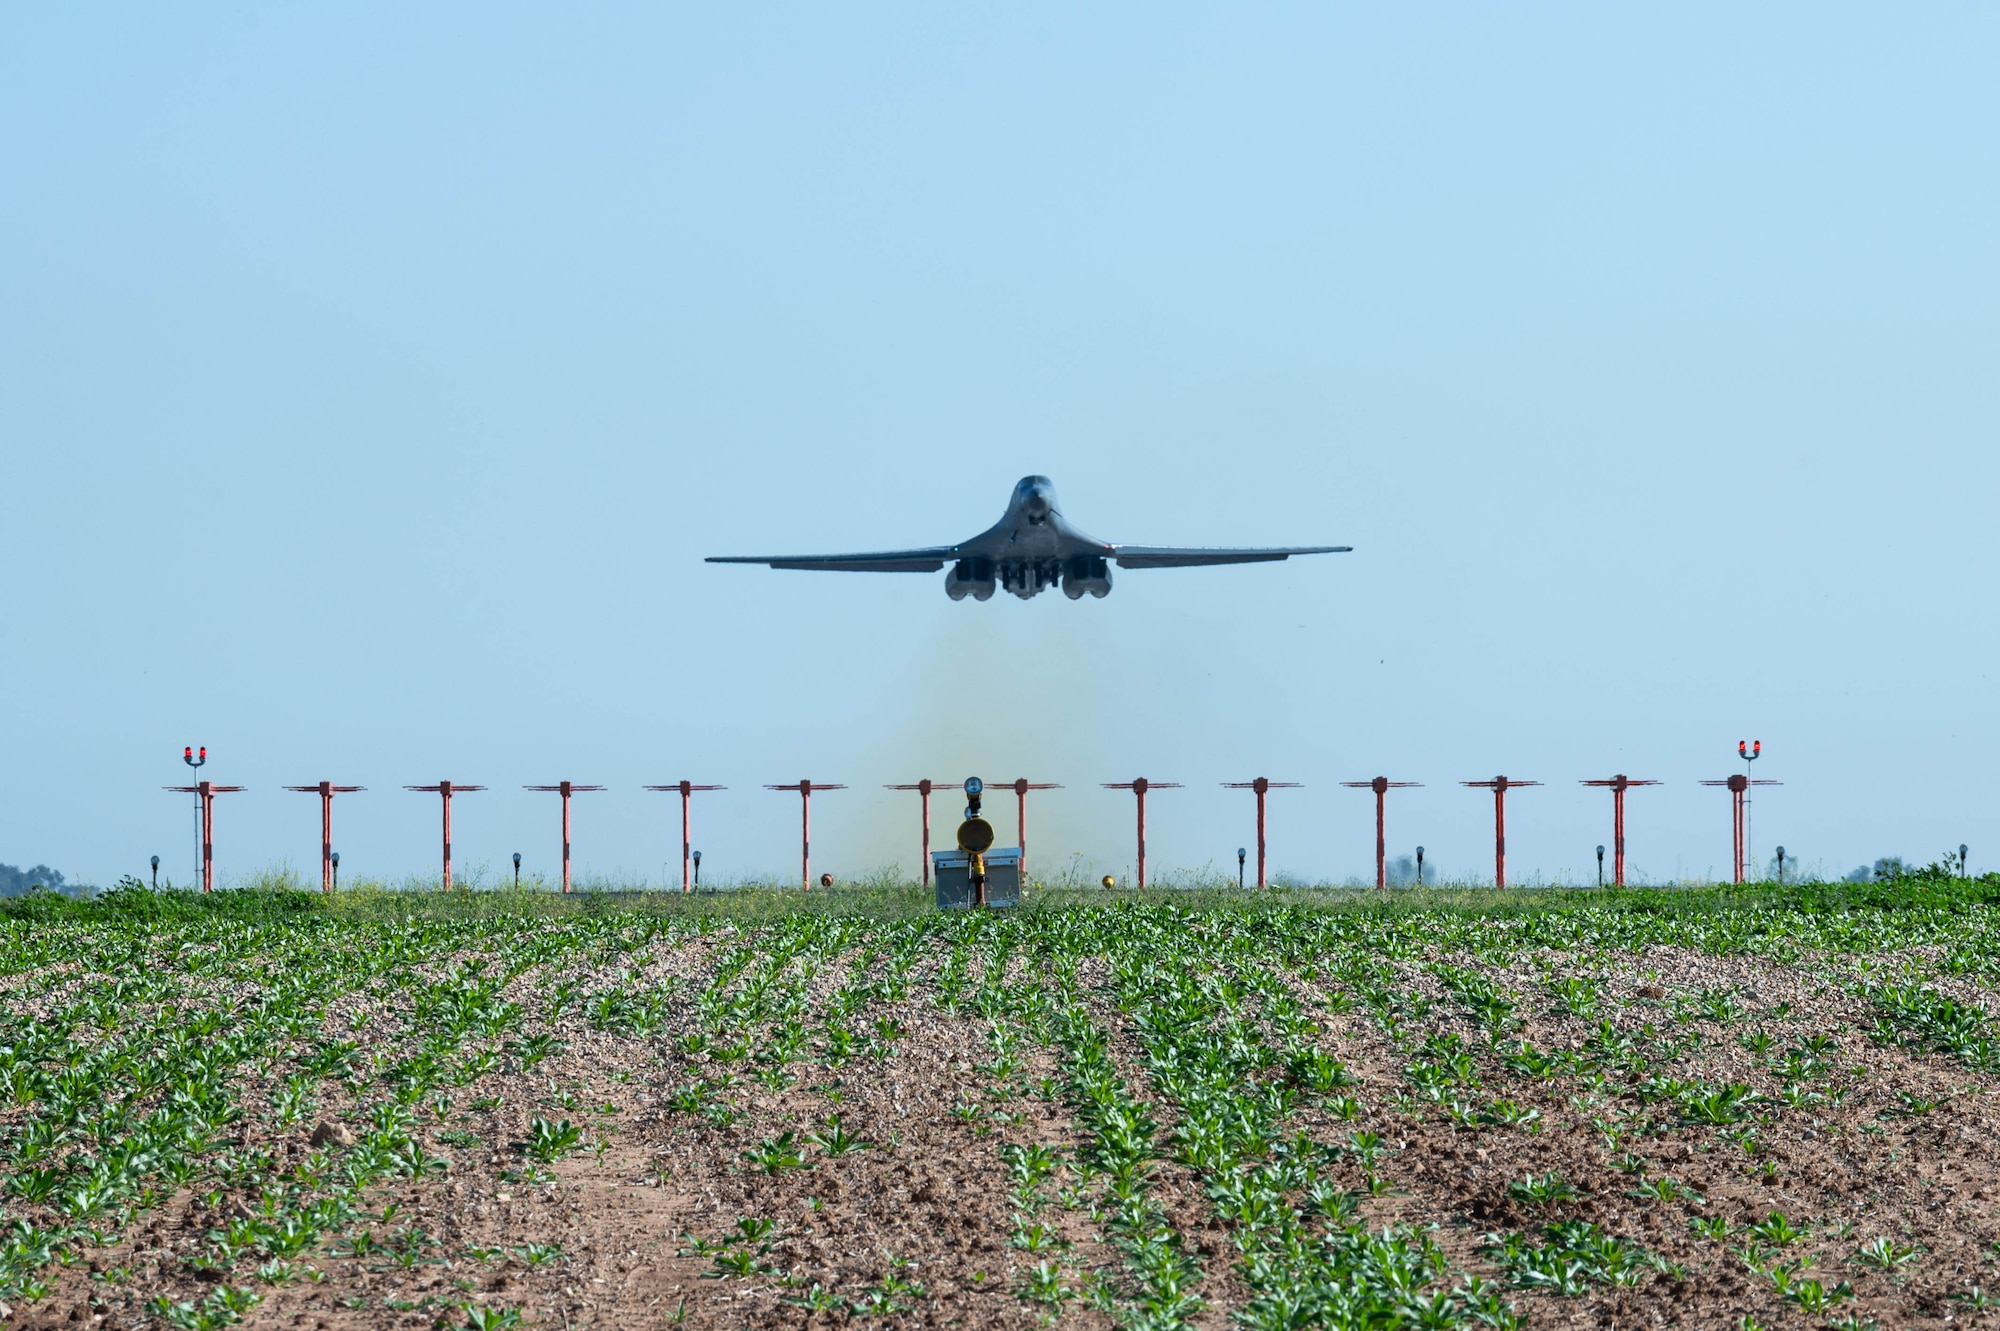 A U.S. Air Force B-1B Lancer takes off from a runway